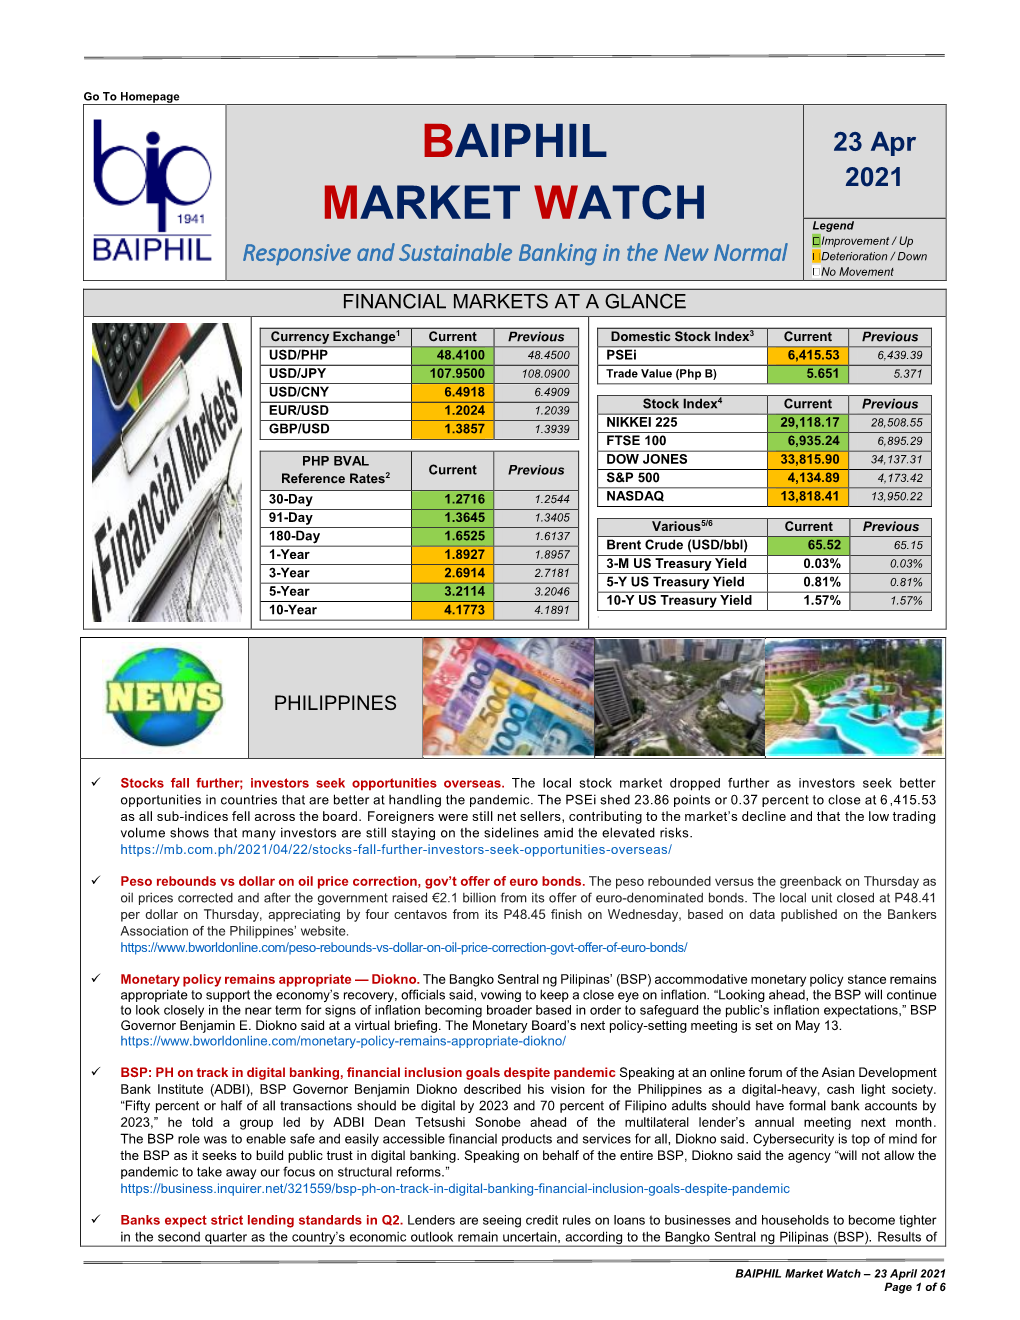 BAIPHIL Market Watch – 23 April 2021 Page 1 of 6